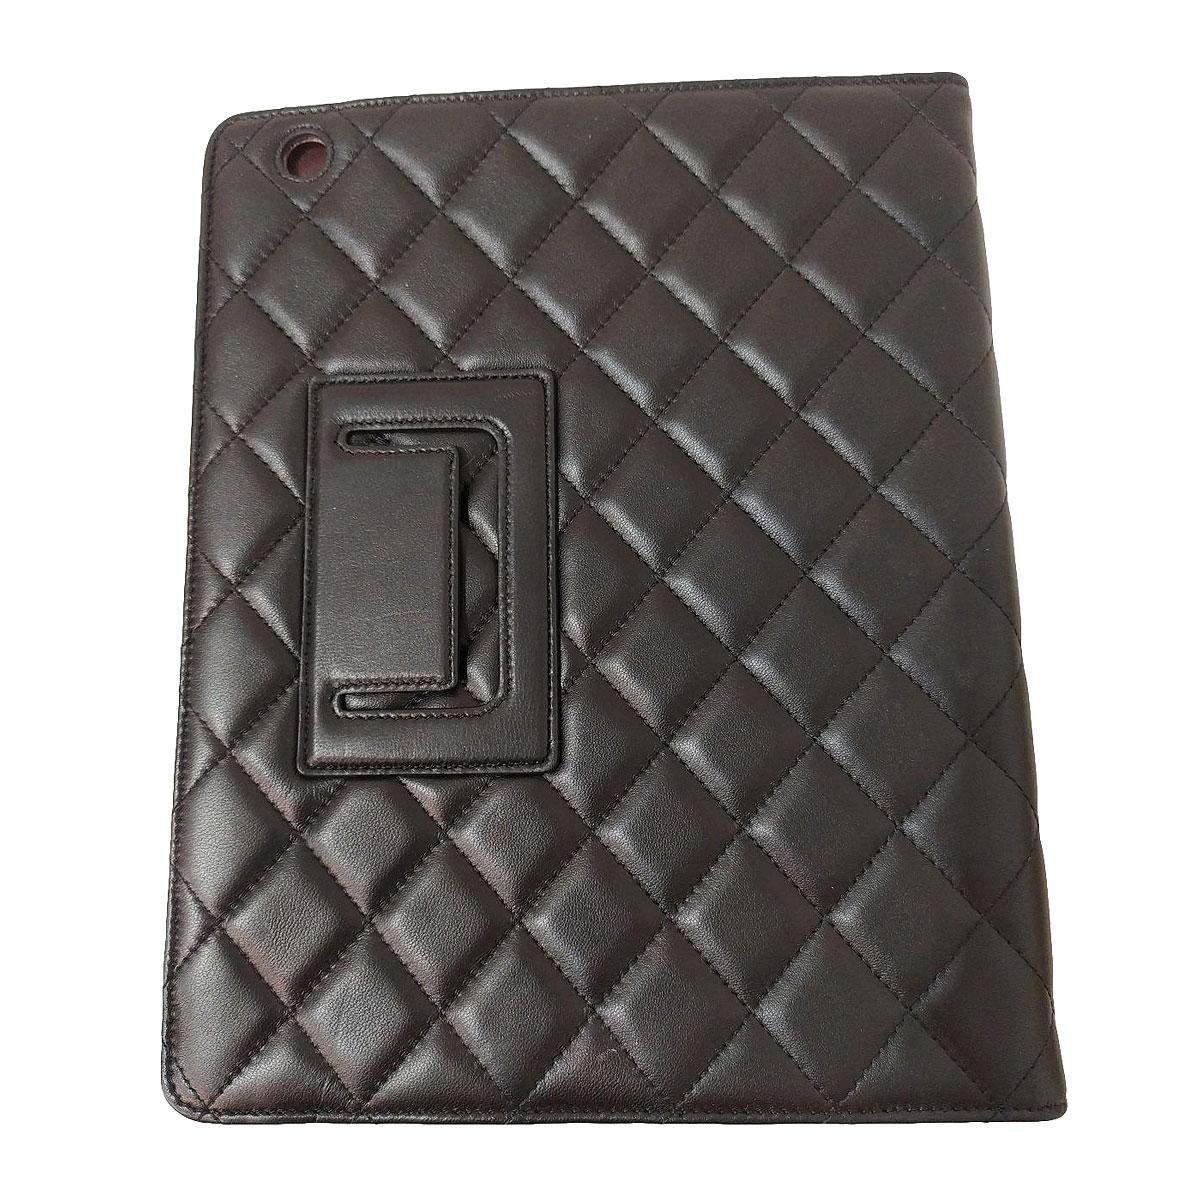 Beautiful and trendy Chanel ipad case
Leather
Quilted fancy
Burgundy color inside with tablet compartment
19,5 x 24,5 (7,67 X 9,64 inches)
Light sign of bending, see photo
Worldwide express shipping included in the price !